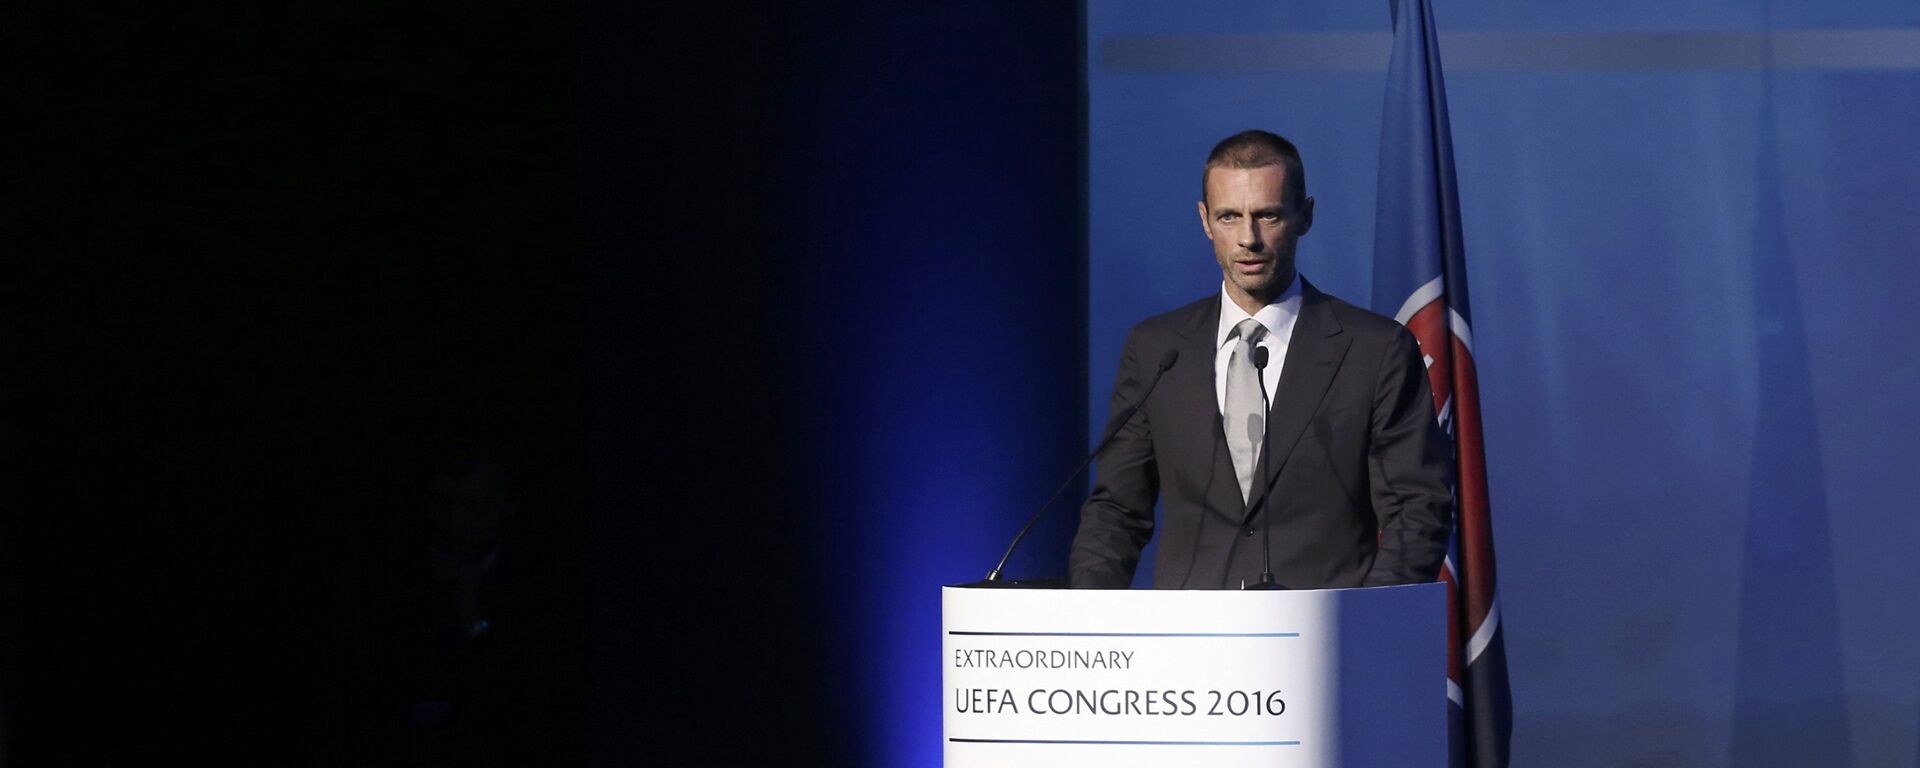 Newly elected UEFA President Aleksander Ceferin of Slovenia delivers a speech during the Extraordinary Congress in Athens, Greece September 14, 2016 - اسپوتنیک افغانستان  , 1920, 10.07.2021